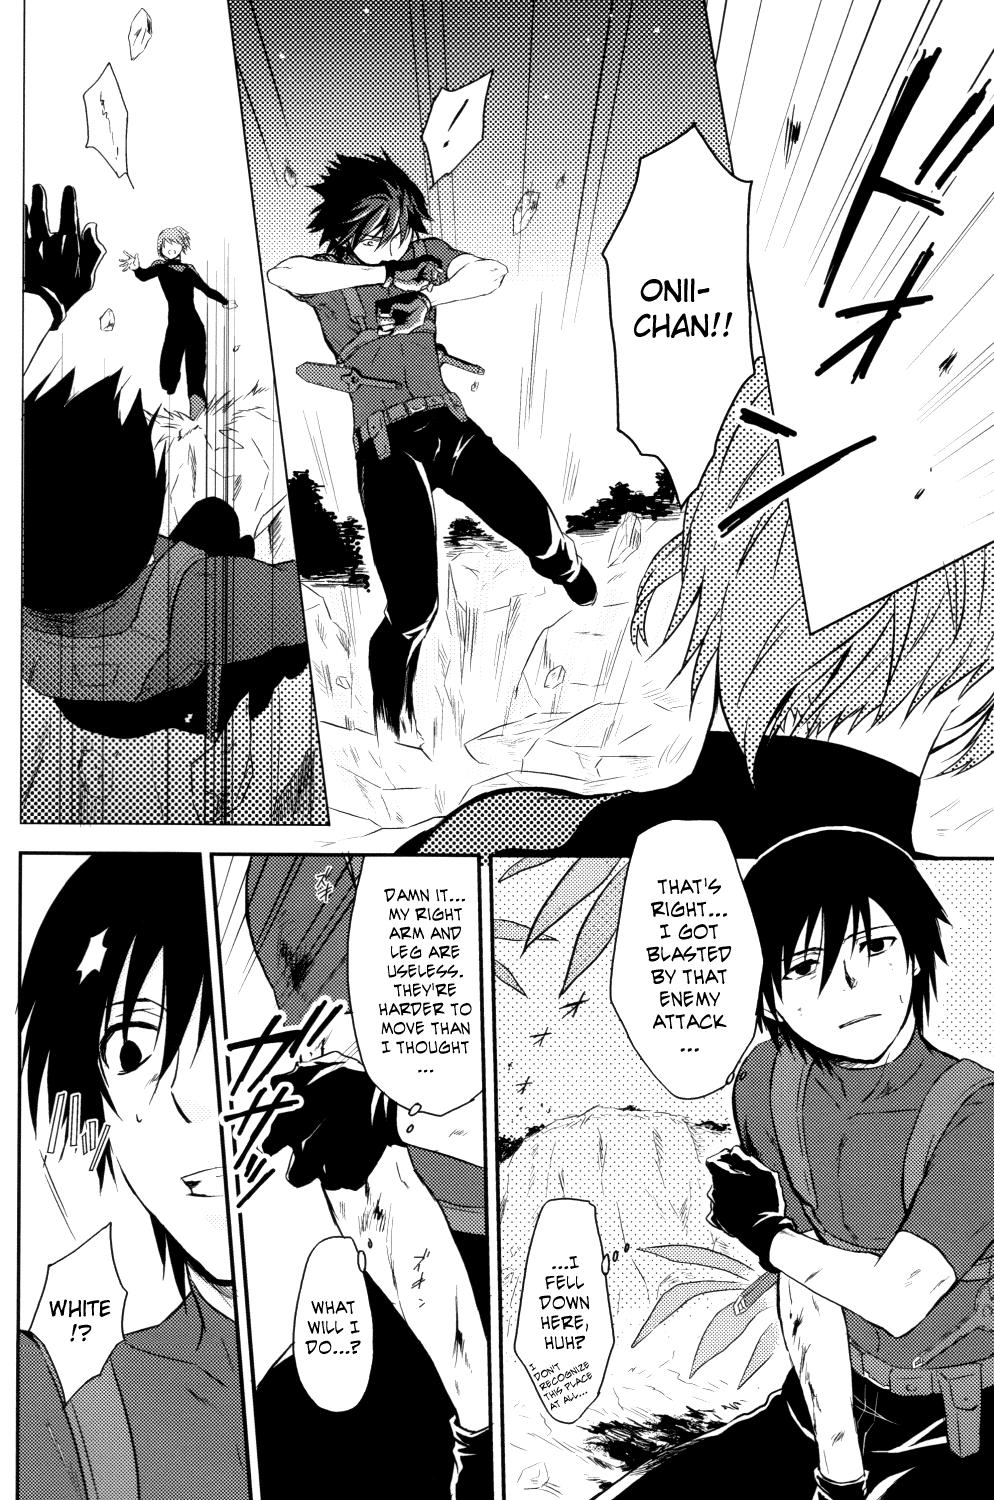 One Inran Explosion - Darker than black Yanks Featured - Page 6